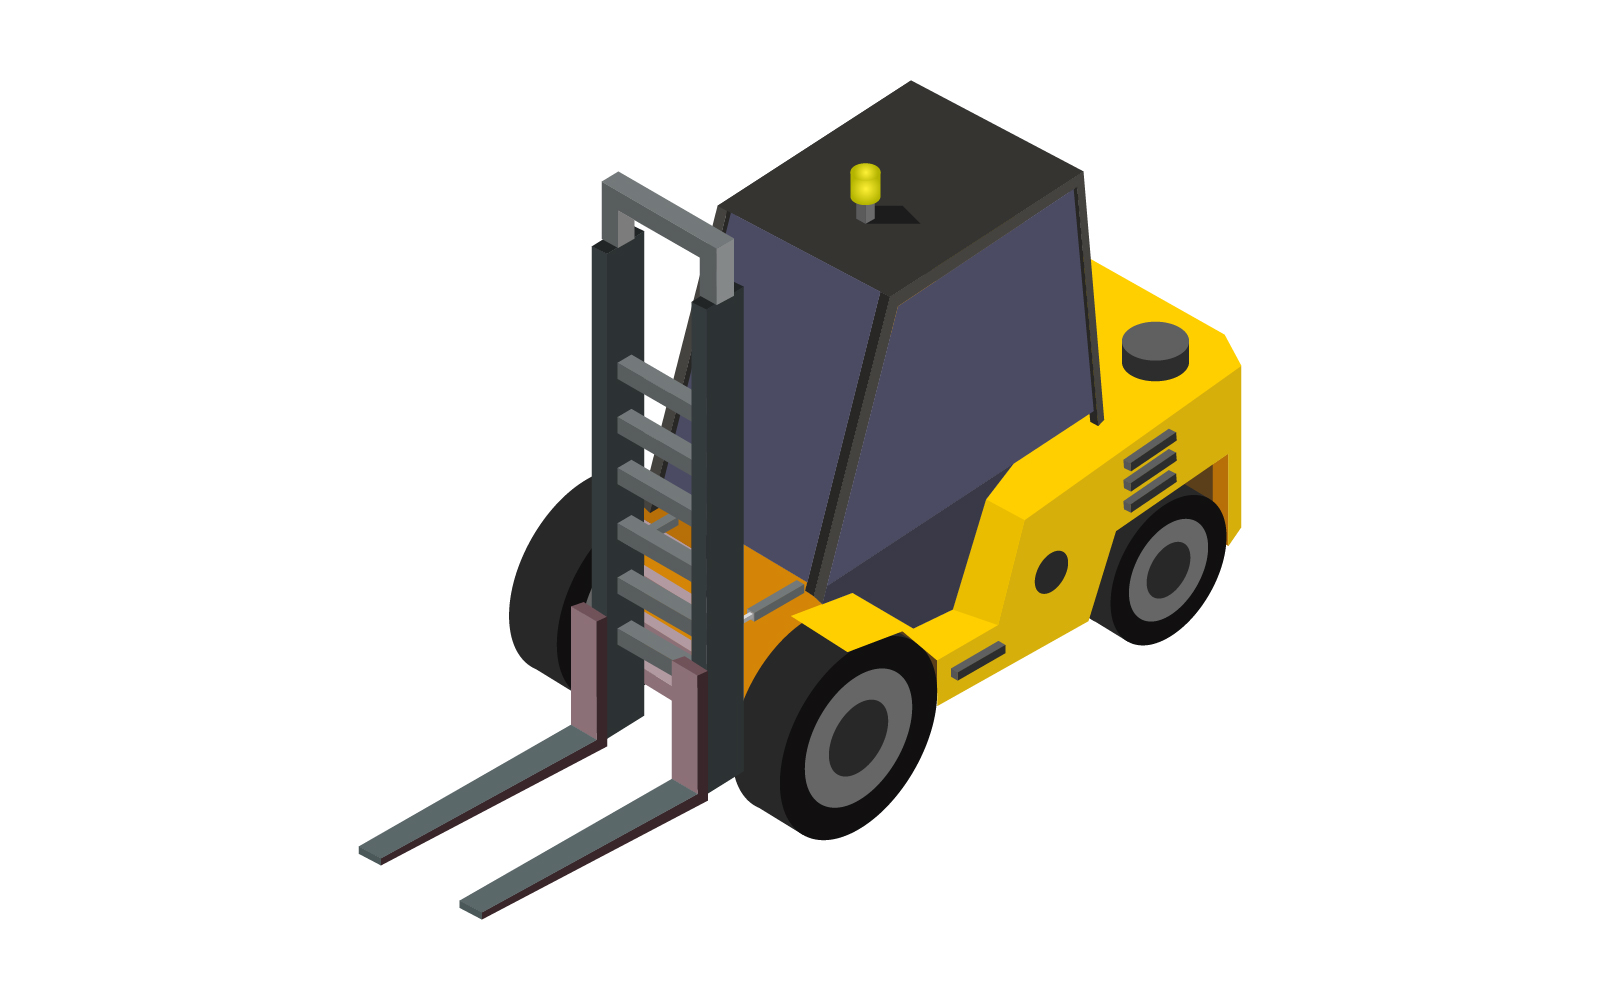 Forklift illustrated  on a white